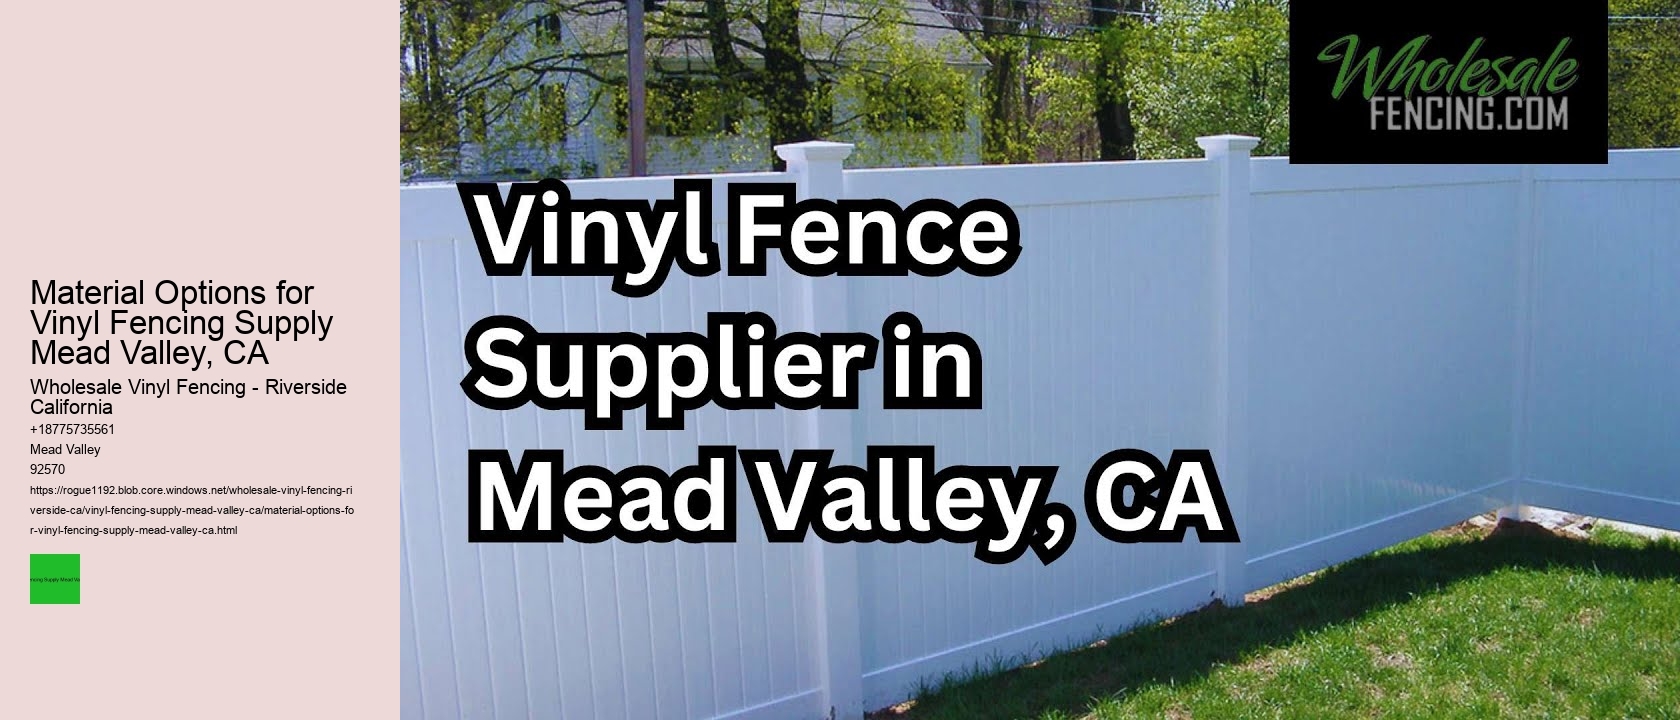 Material Options for Vinyl Fencing Supply Mead Valley, CA